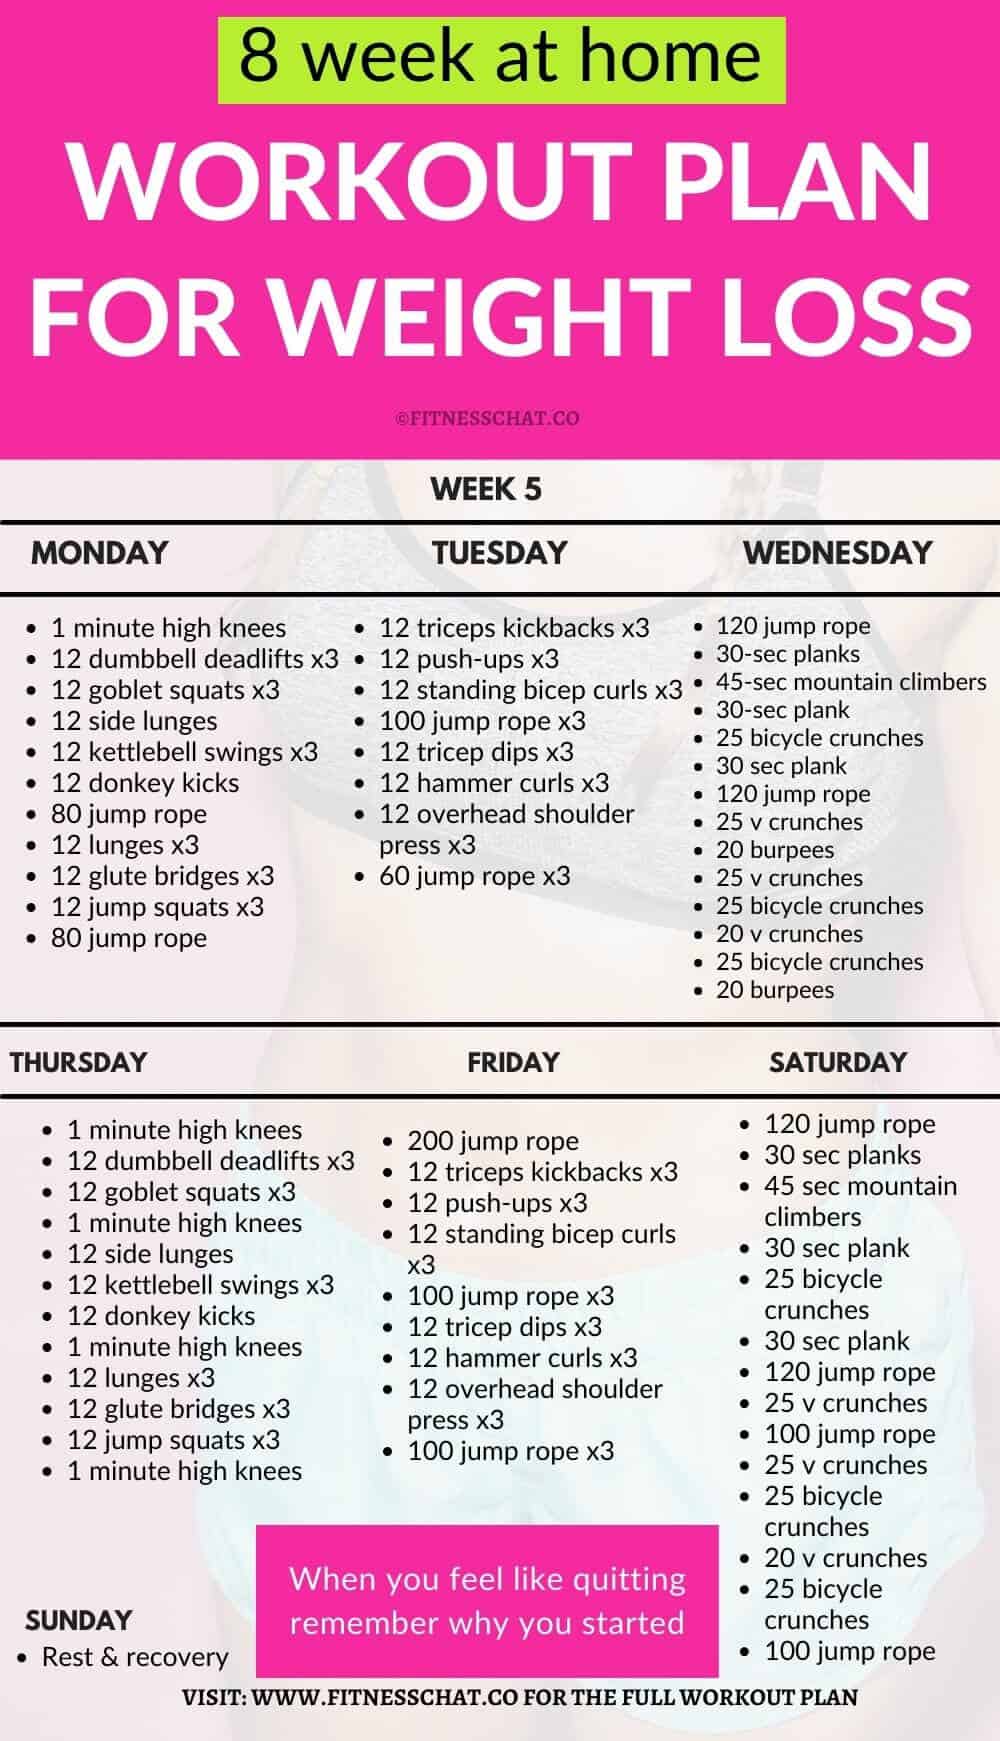 Workout plan for weight loss at home